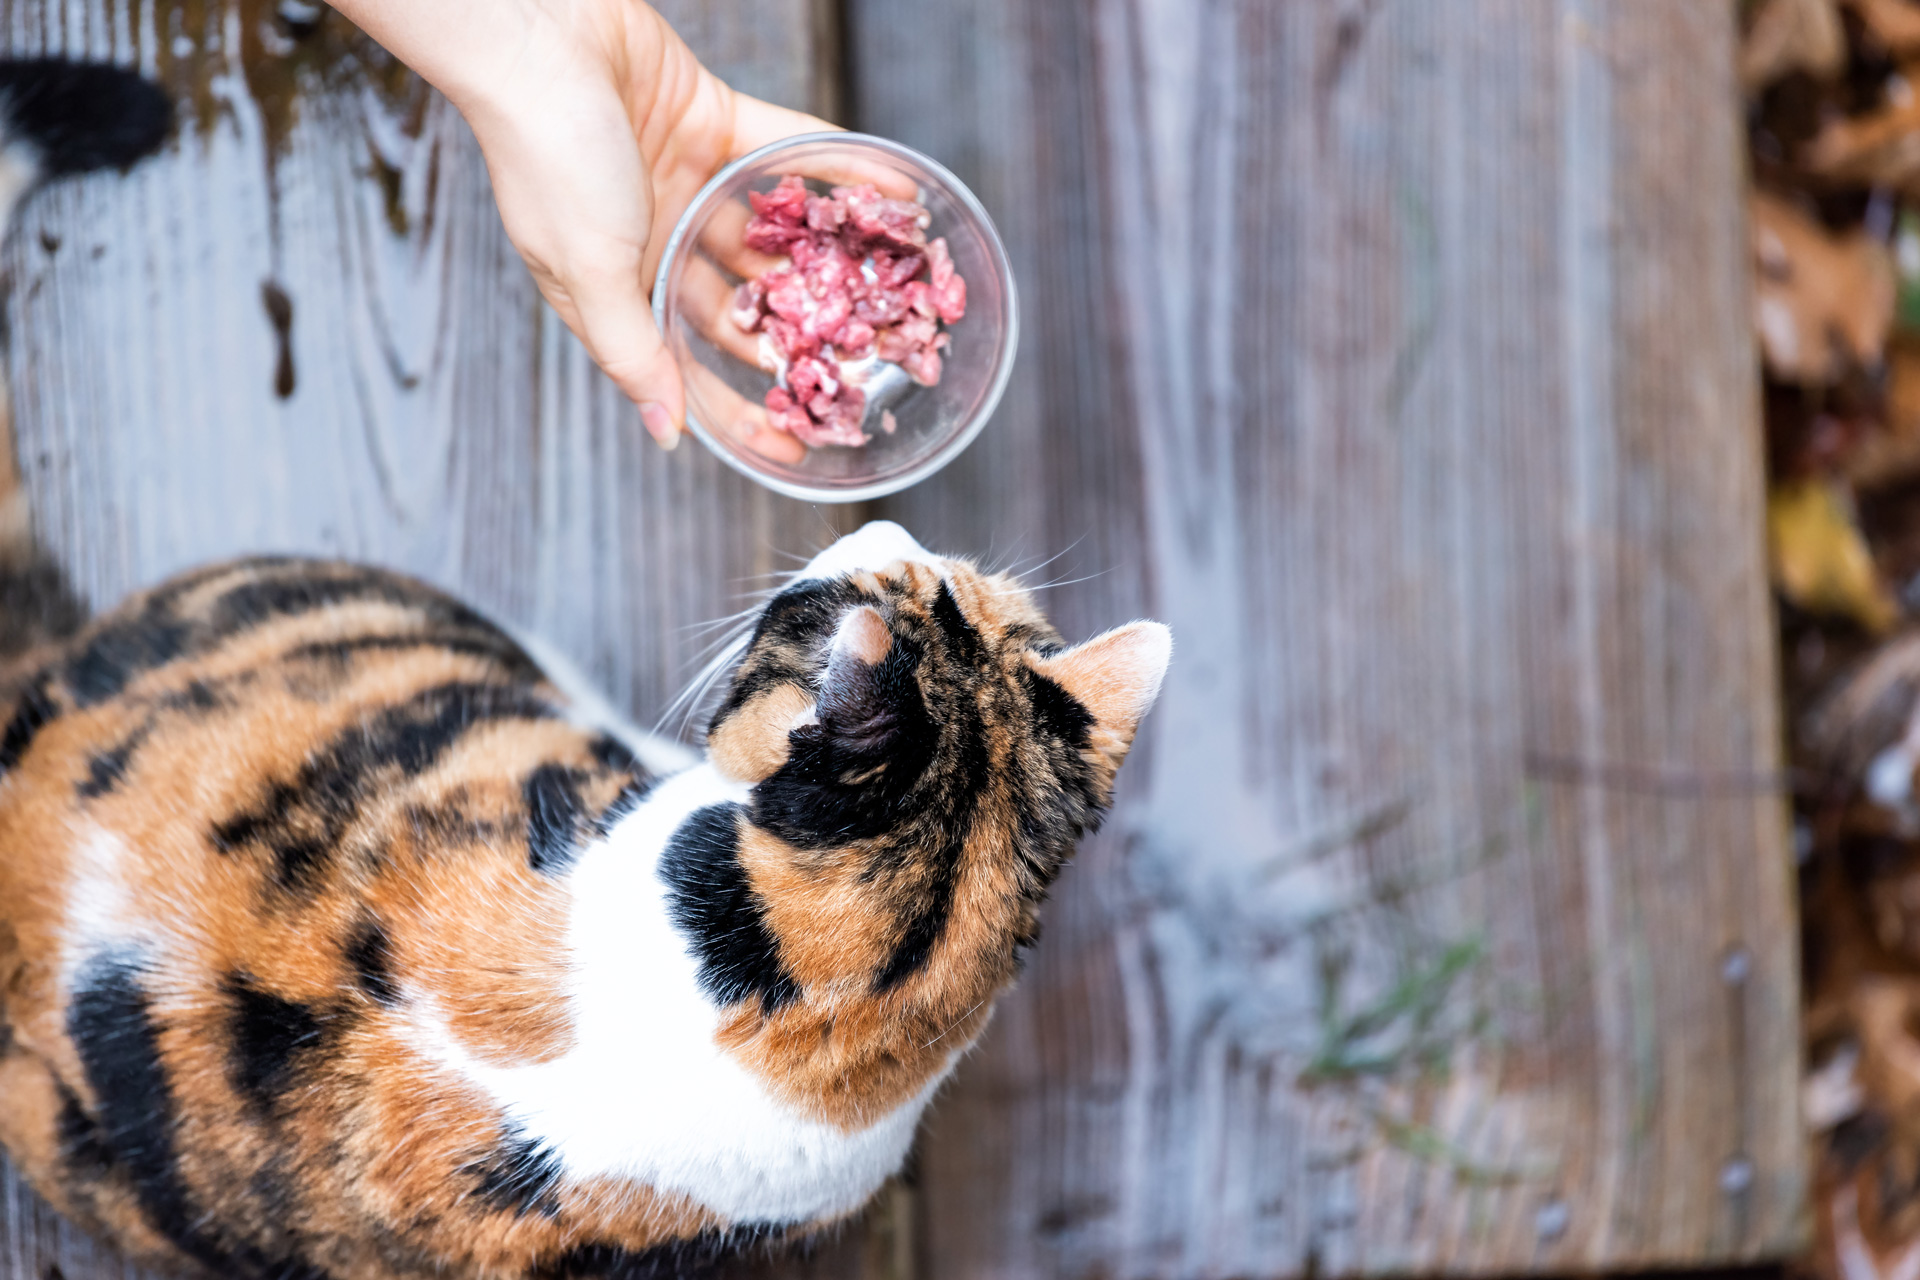 calico cat sniffing a bowl of food offered by a person